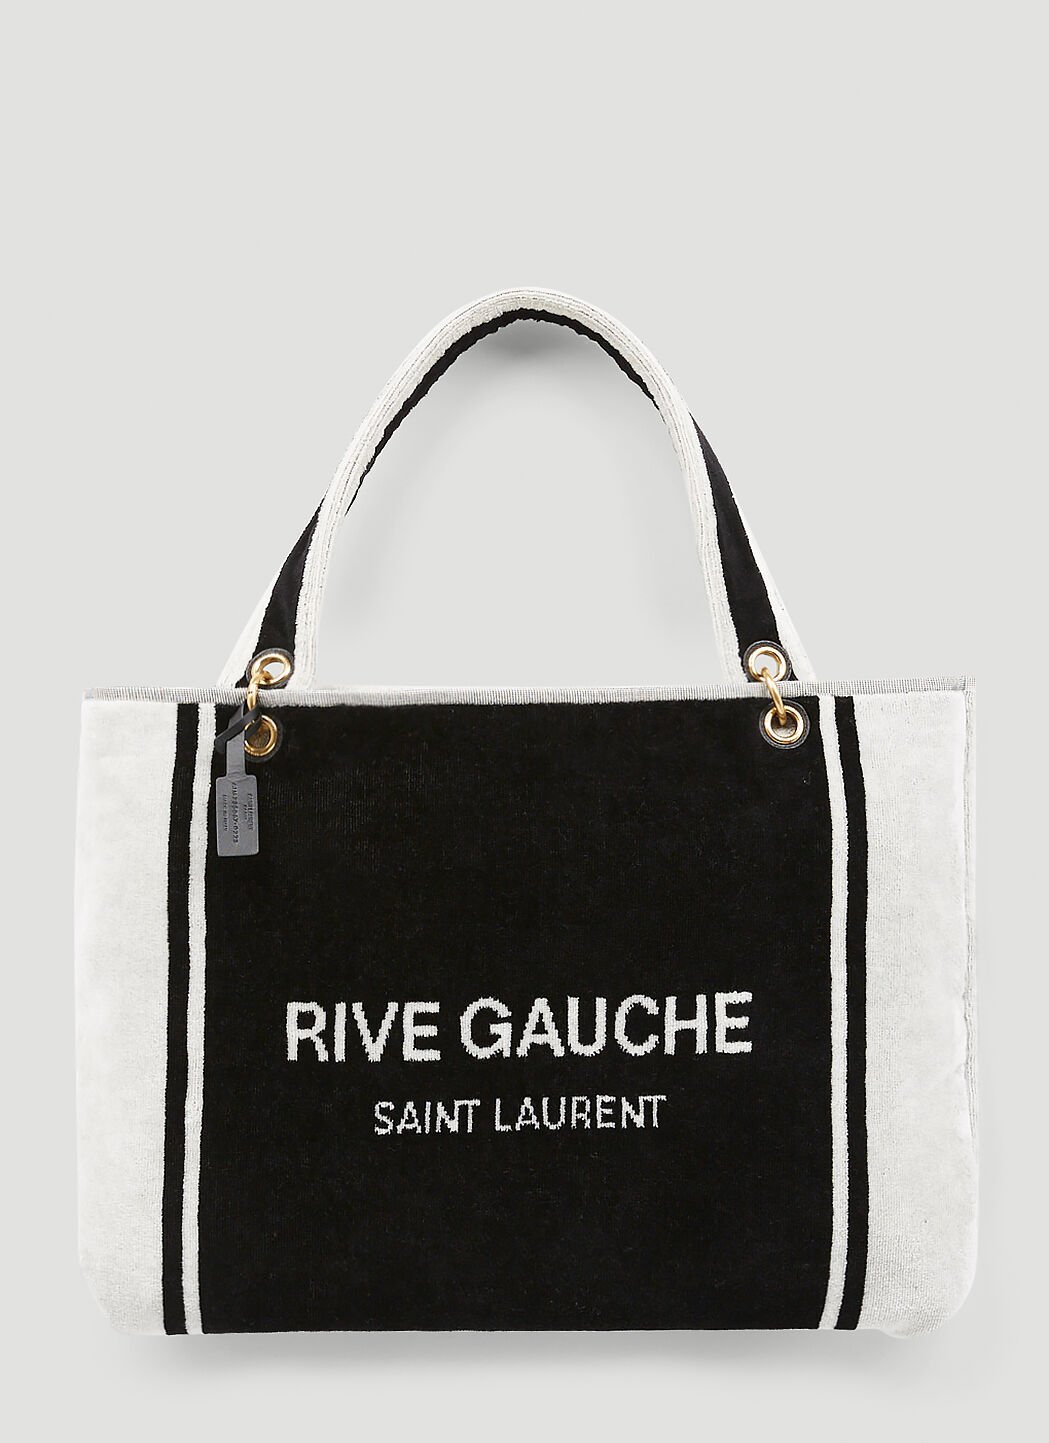 Gallery Dept. Rive Gauche Towel Tote Bag Olive gdp0150042